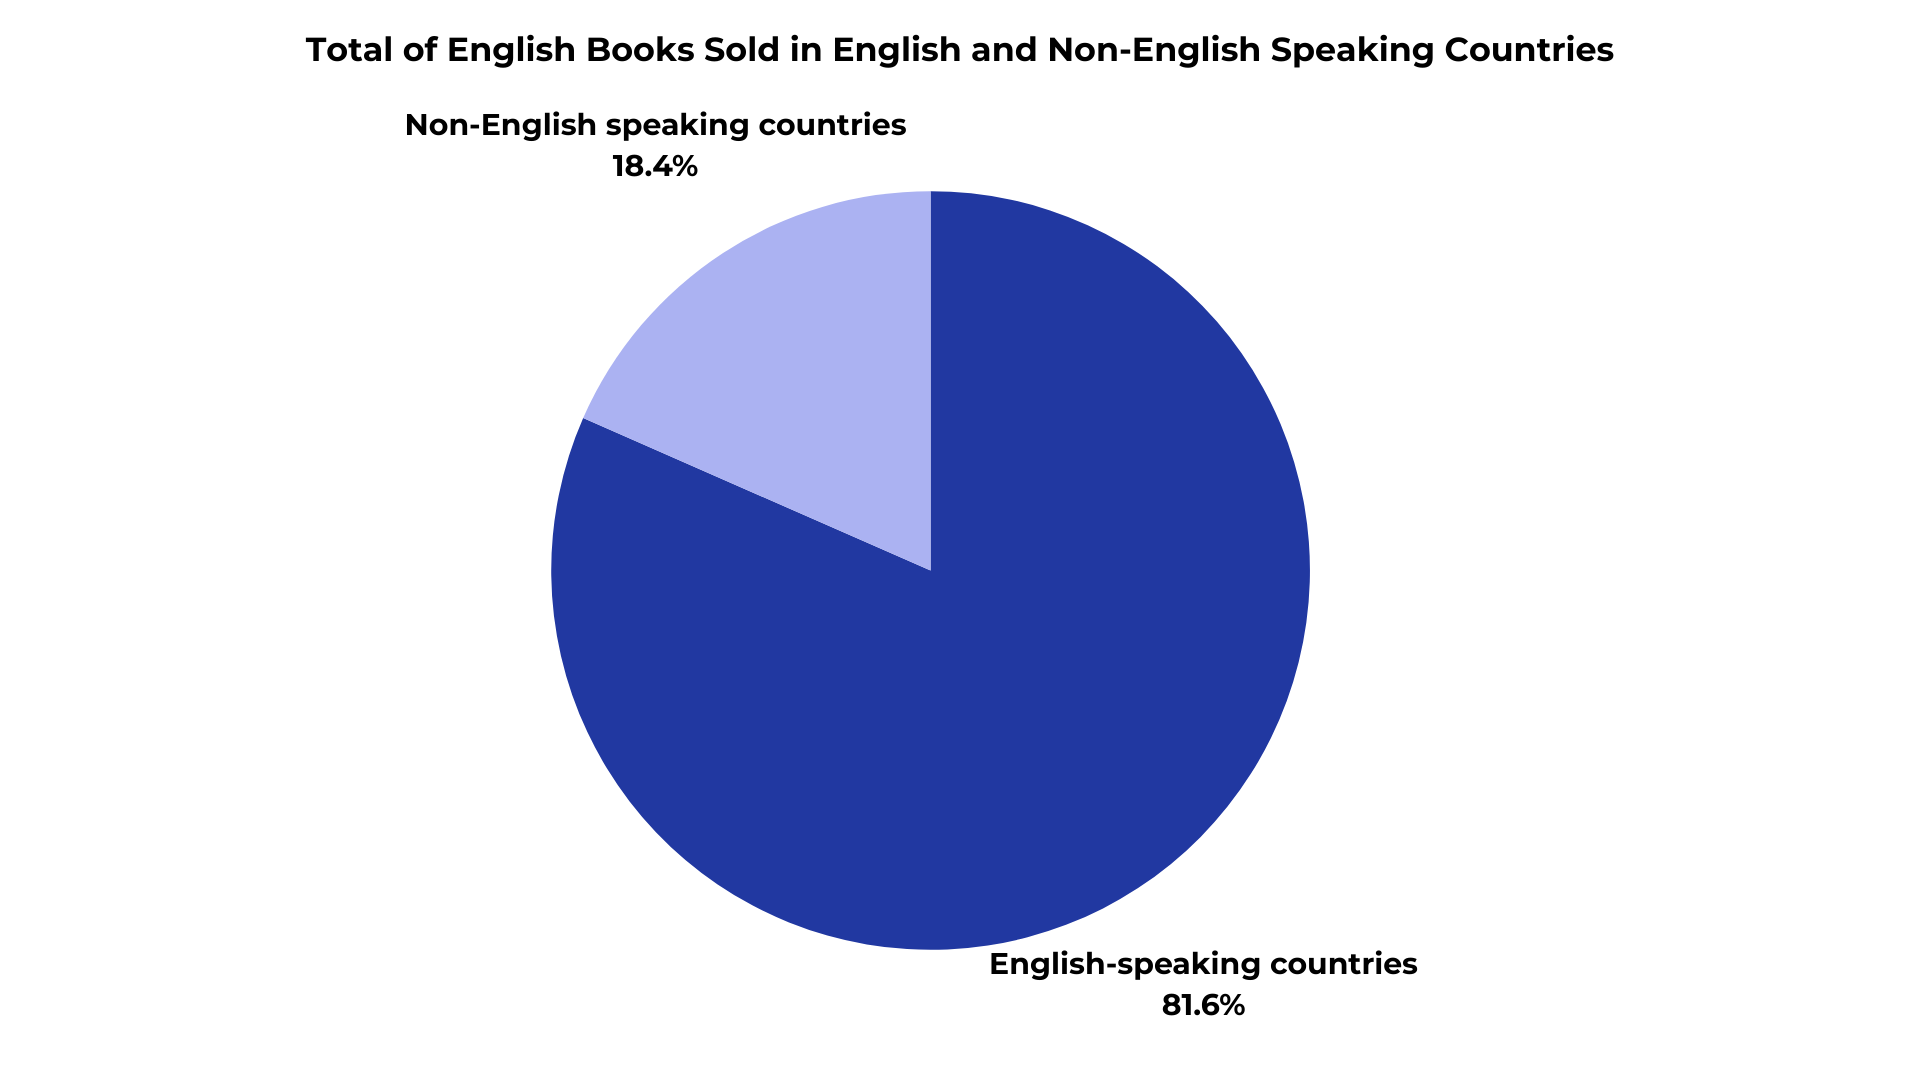 book sales in non-english speaking countries